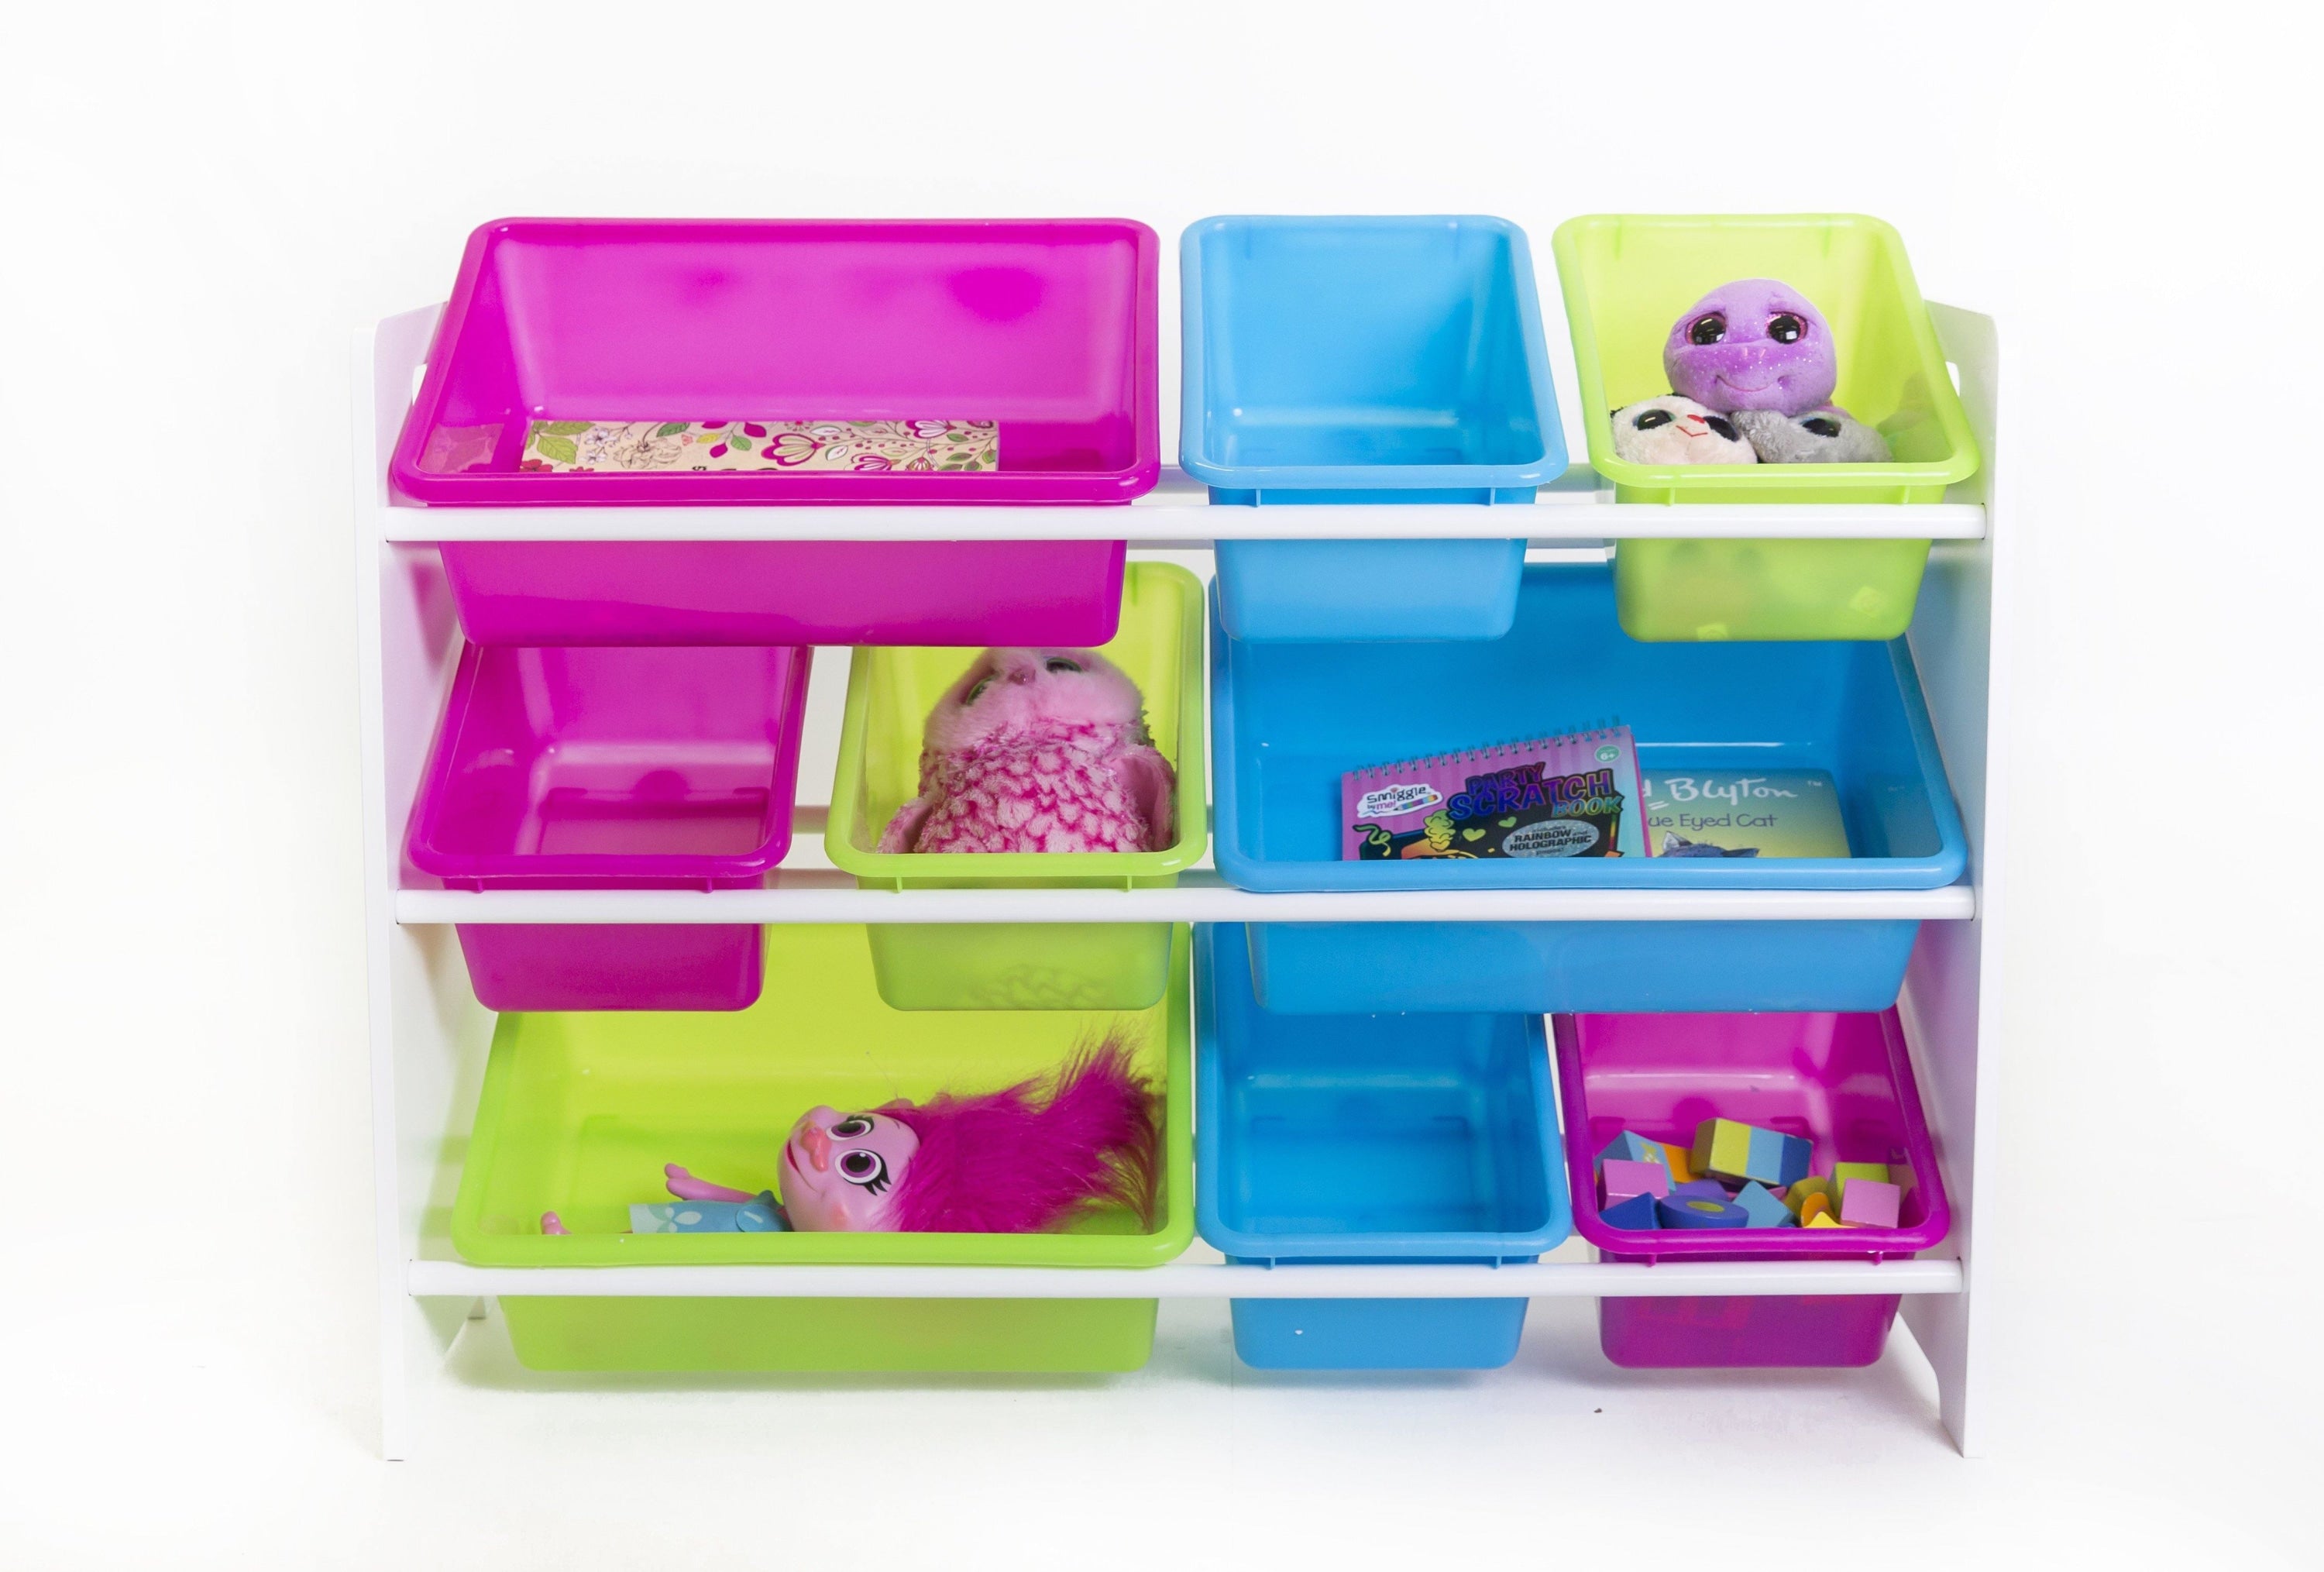 Kids Toy Storage Organiser Unit with 9 Multicolor Bins